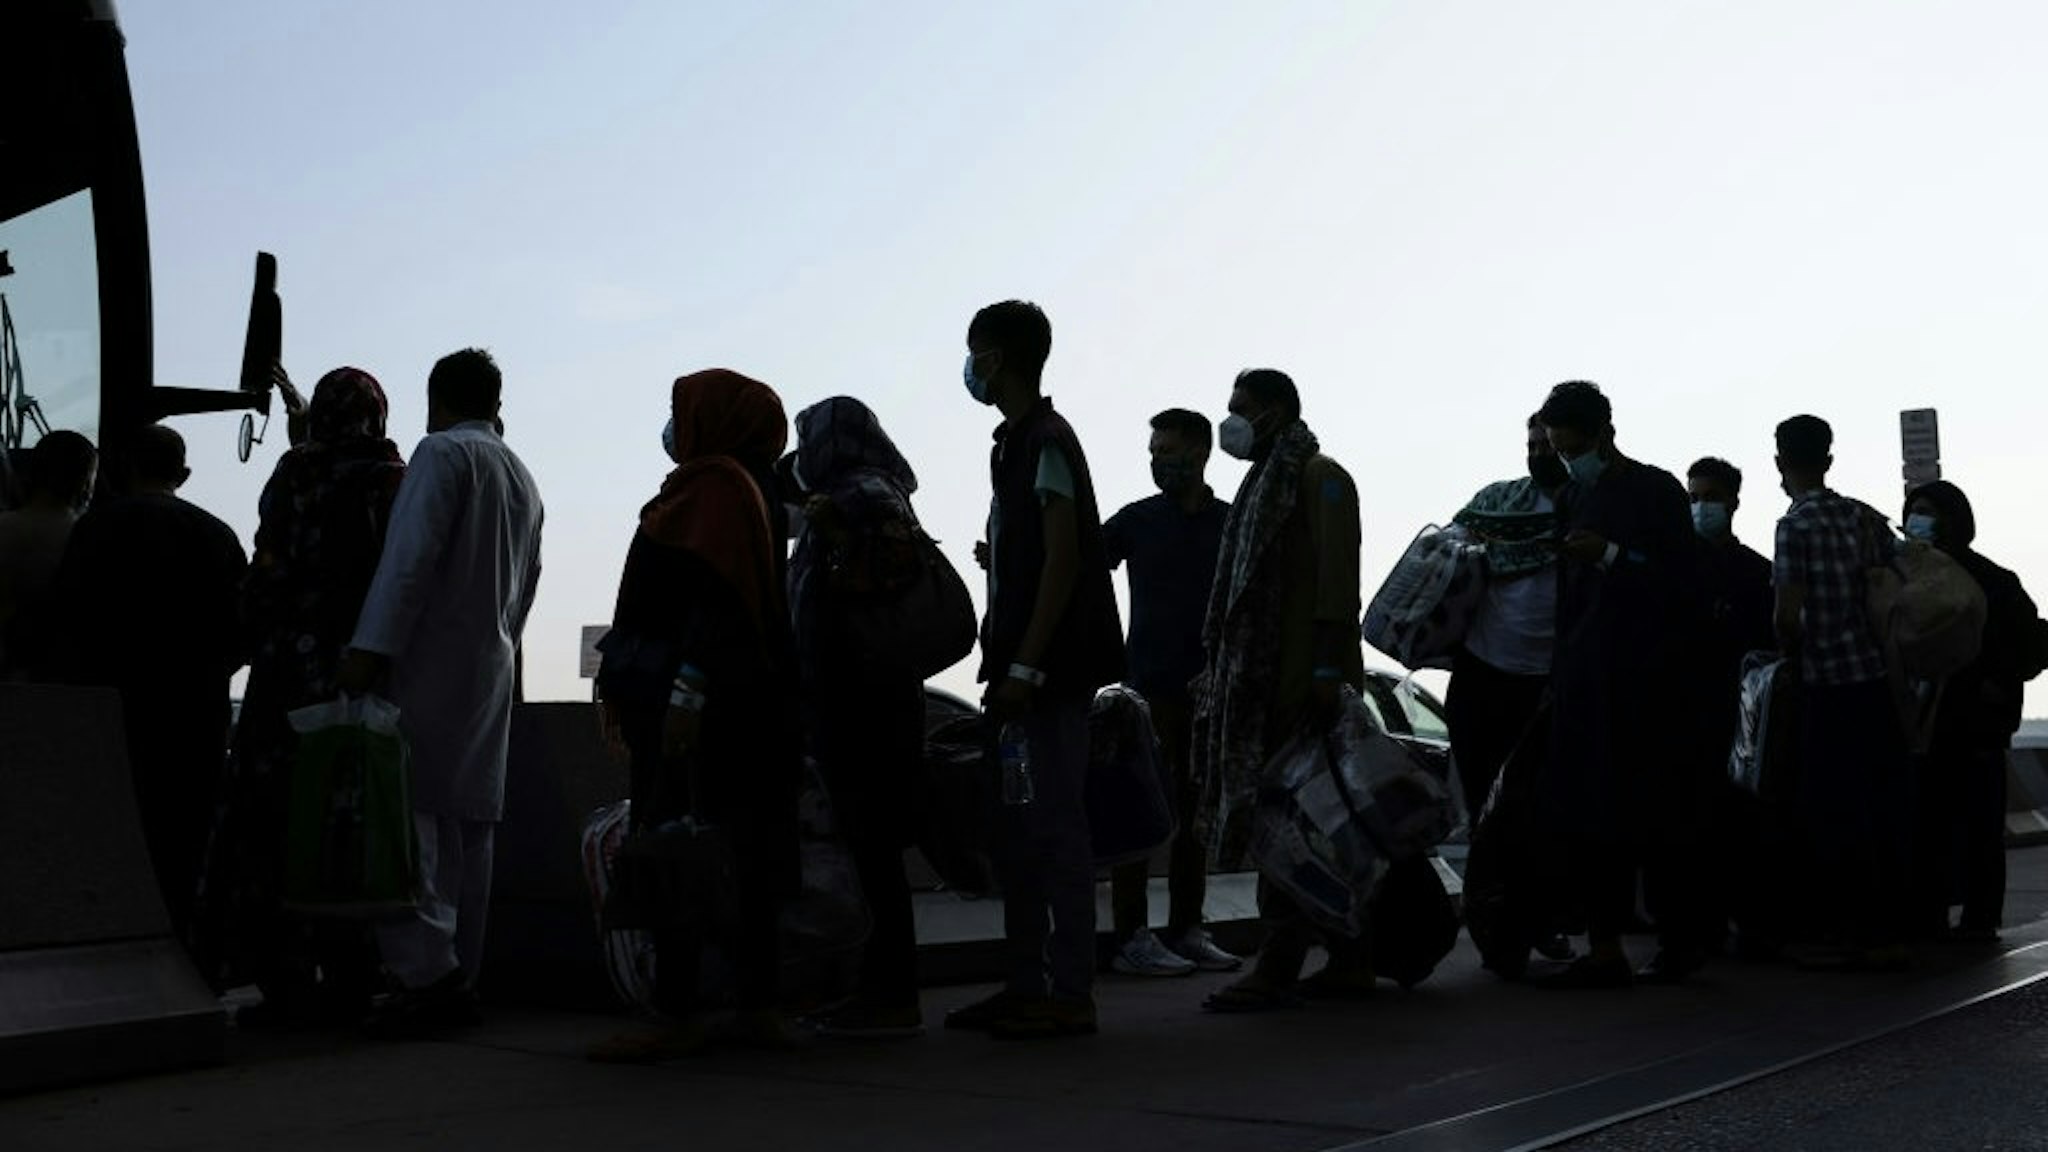 Afghan Refugees Arrive At Dulles Airport Outside Nation's Capital DULLES, VIRGINIA - AUGUST 25: People evacuated from Kabul Afghanistan wait to board a bus that will take them to a refugee processing center at the Dulles International Airport on August 25, 2021 in Dulles, Virginia. According to the U.S. Department of Defense, five evacuation flights from Kabul, Afghanistan have landed at the Dulles Airport carrying 1,200 Afghan refugees in last day. The White House also announced that since August 14, the U.S. has evacuated and facilitated the evacuation of approximately 82,300 people on US military and coalition flights. (Photo by Anna Moneymaker/Getty Images) Anna Moneymaker / Staff